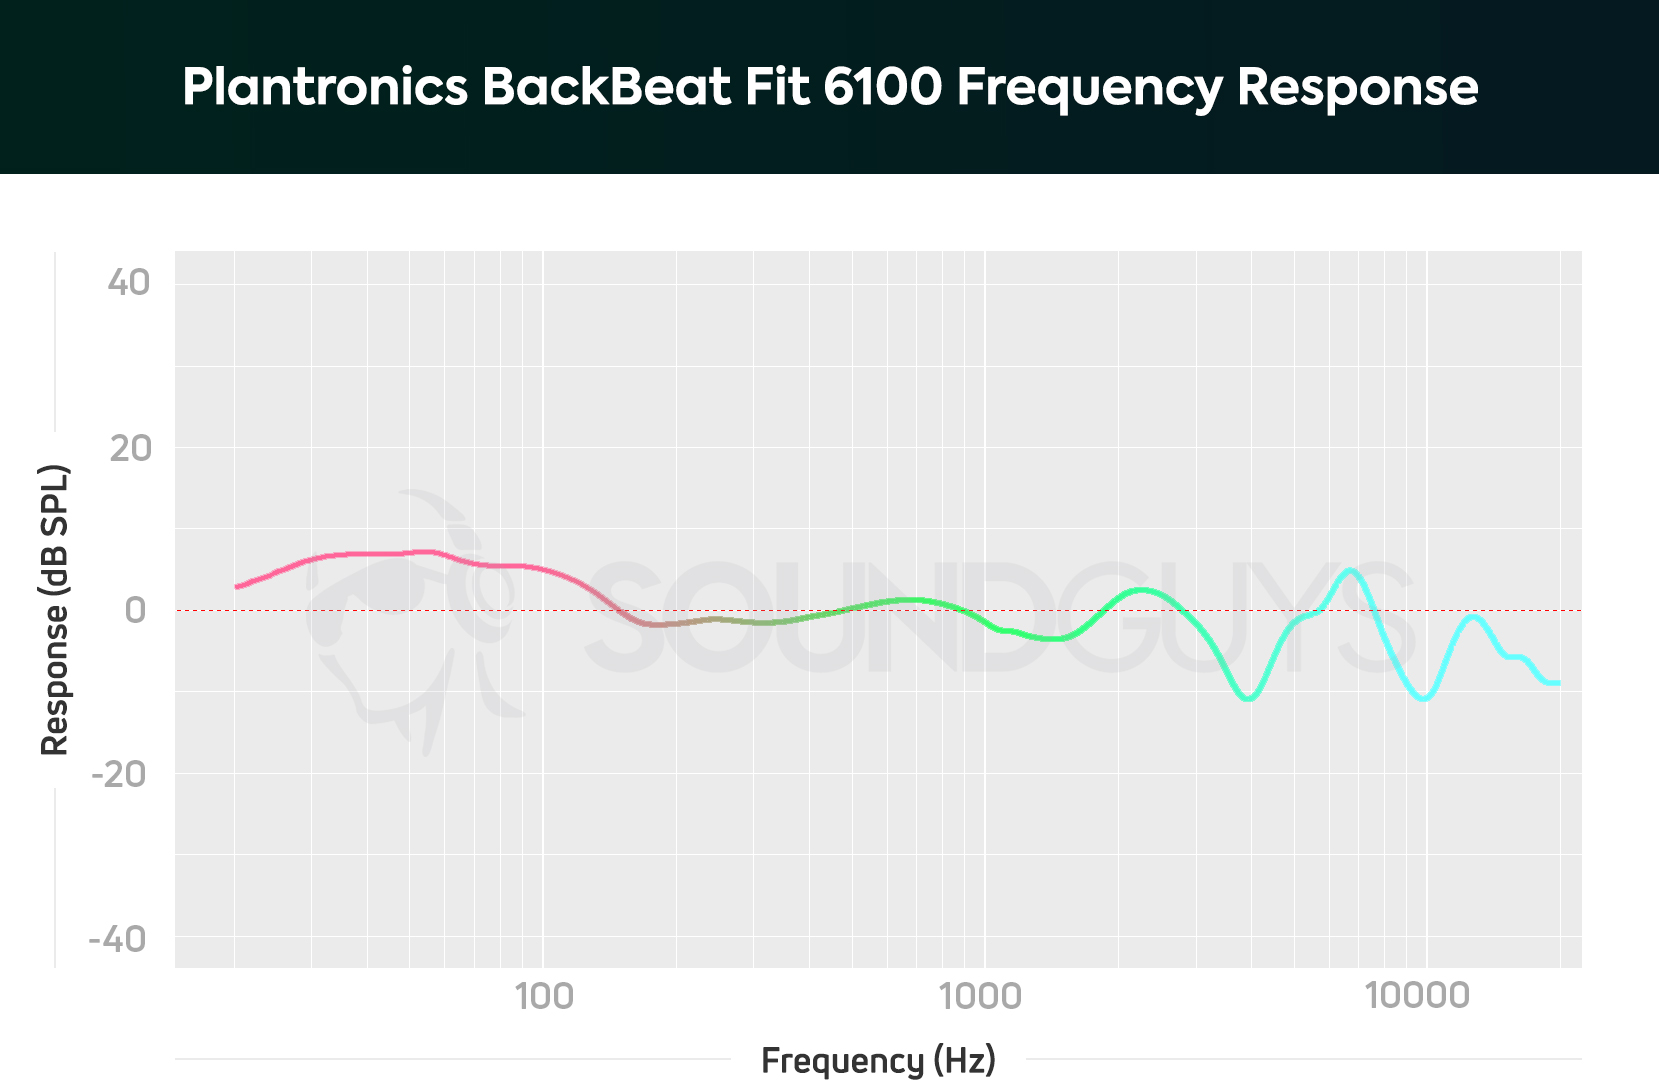 A chart depicts the Plantronics BackBeat Fit 6100 workout headphones' frequency response from the 40mm drivers.